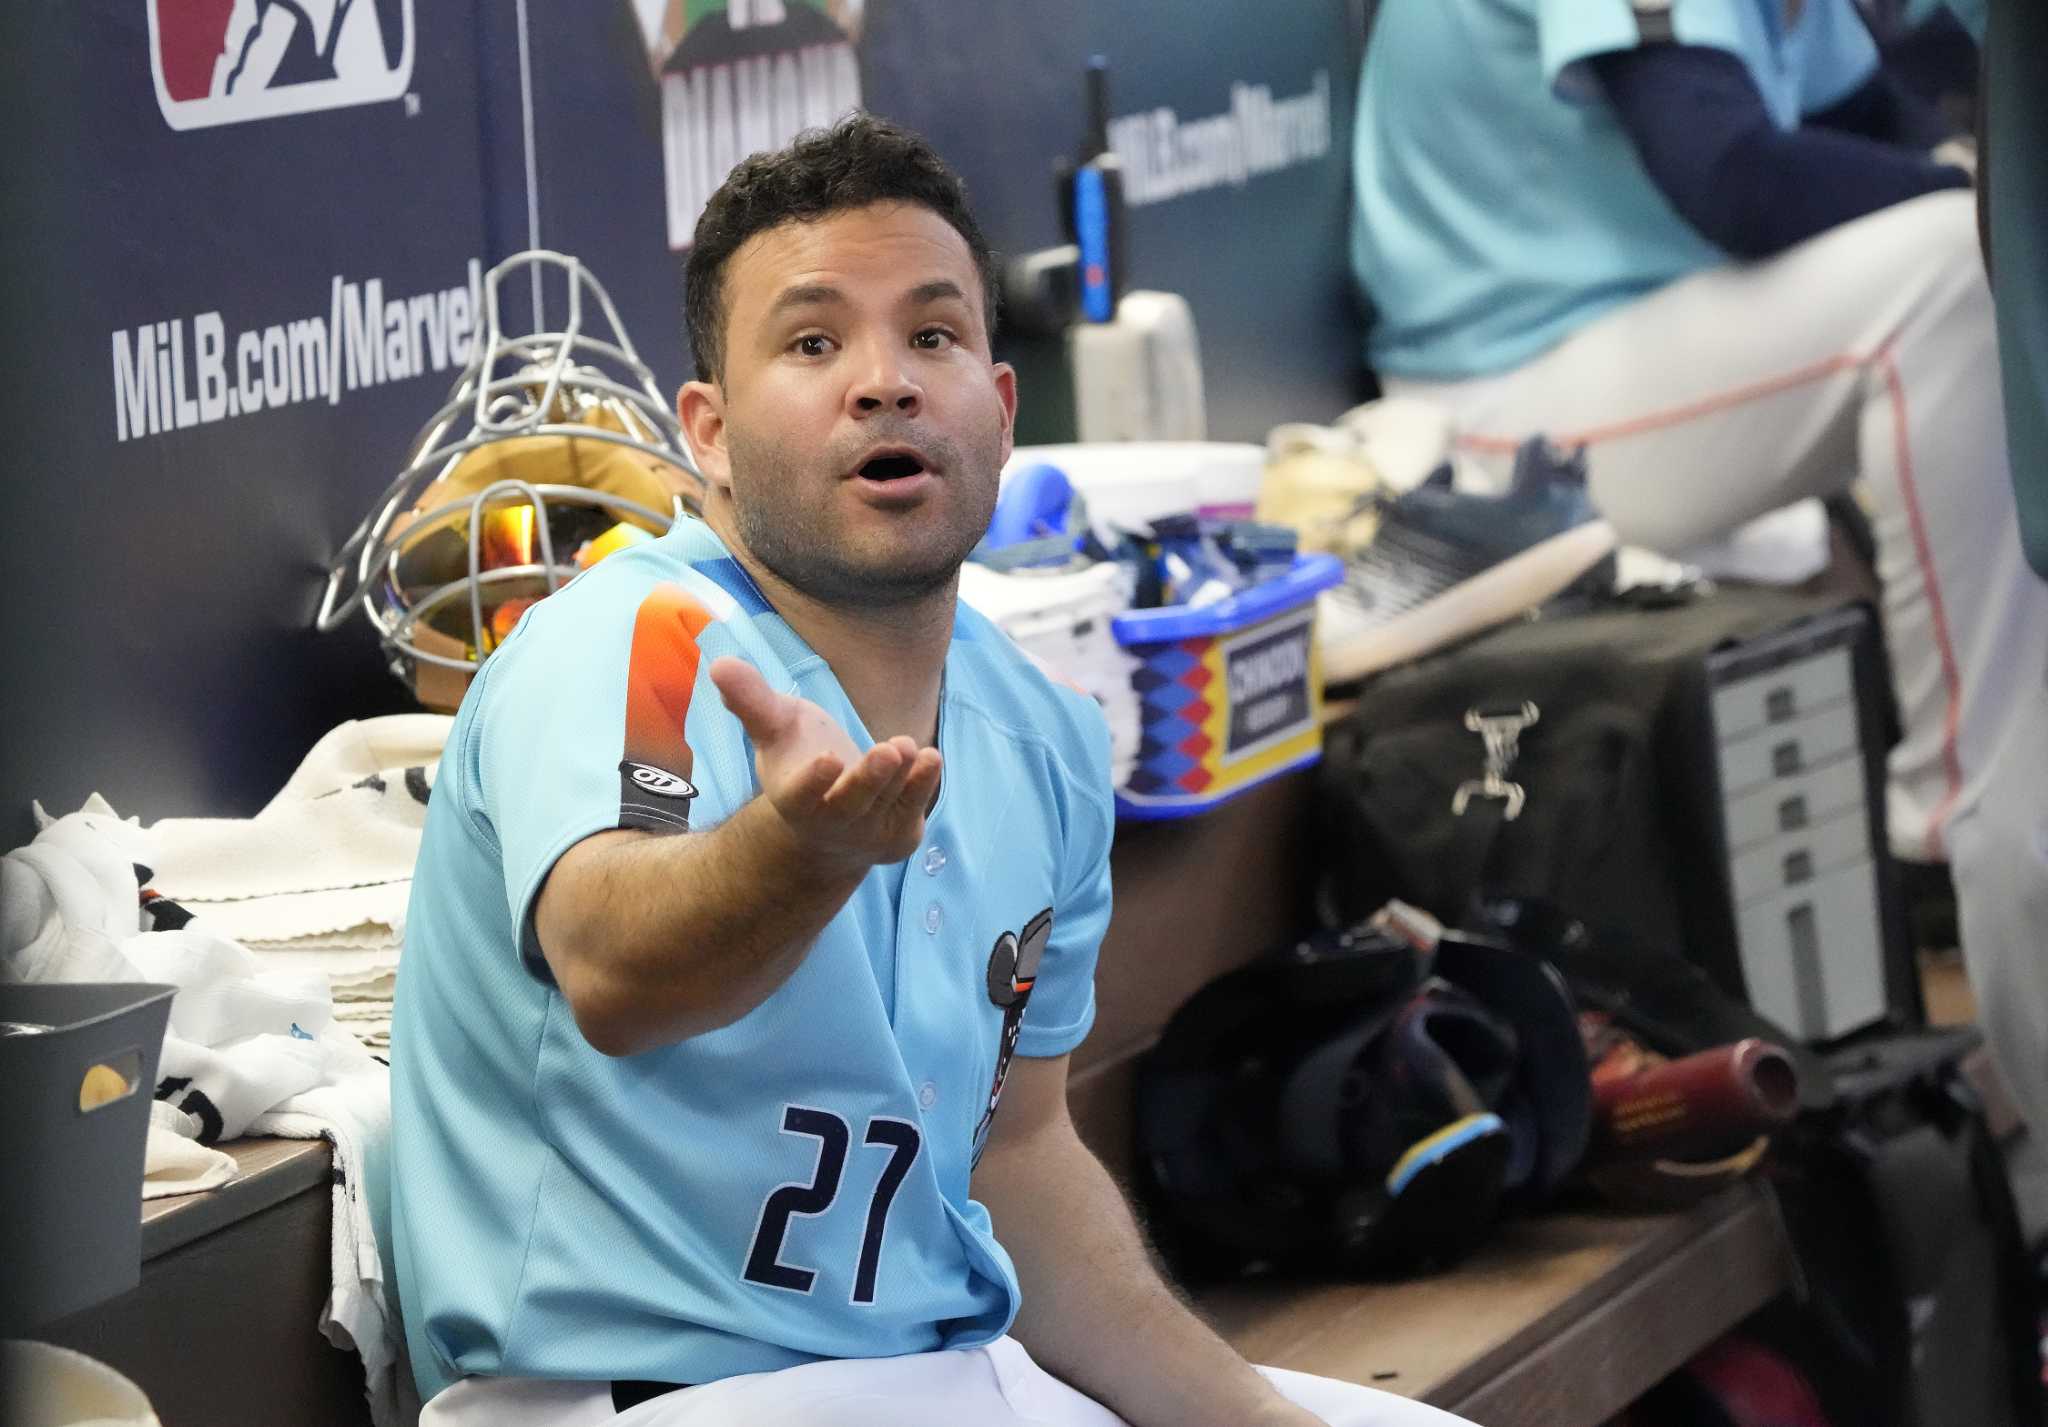 Astros Jose Altuve rehabs with Hooks at Whataburger Field